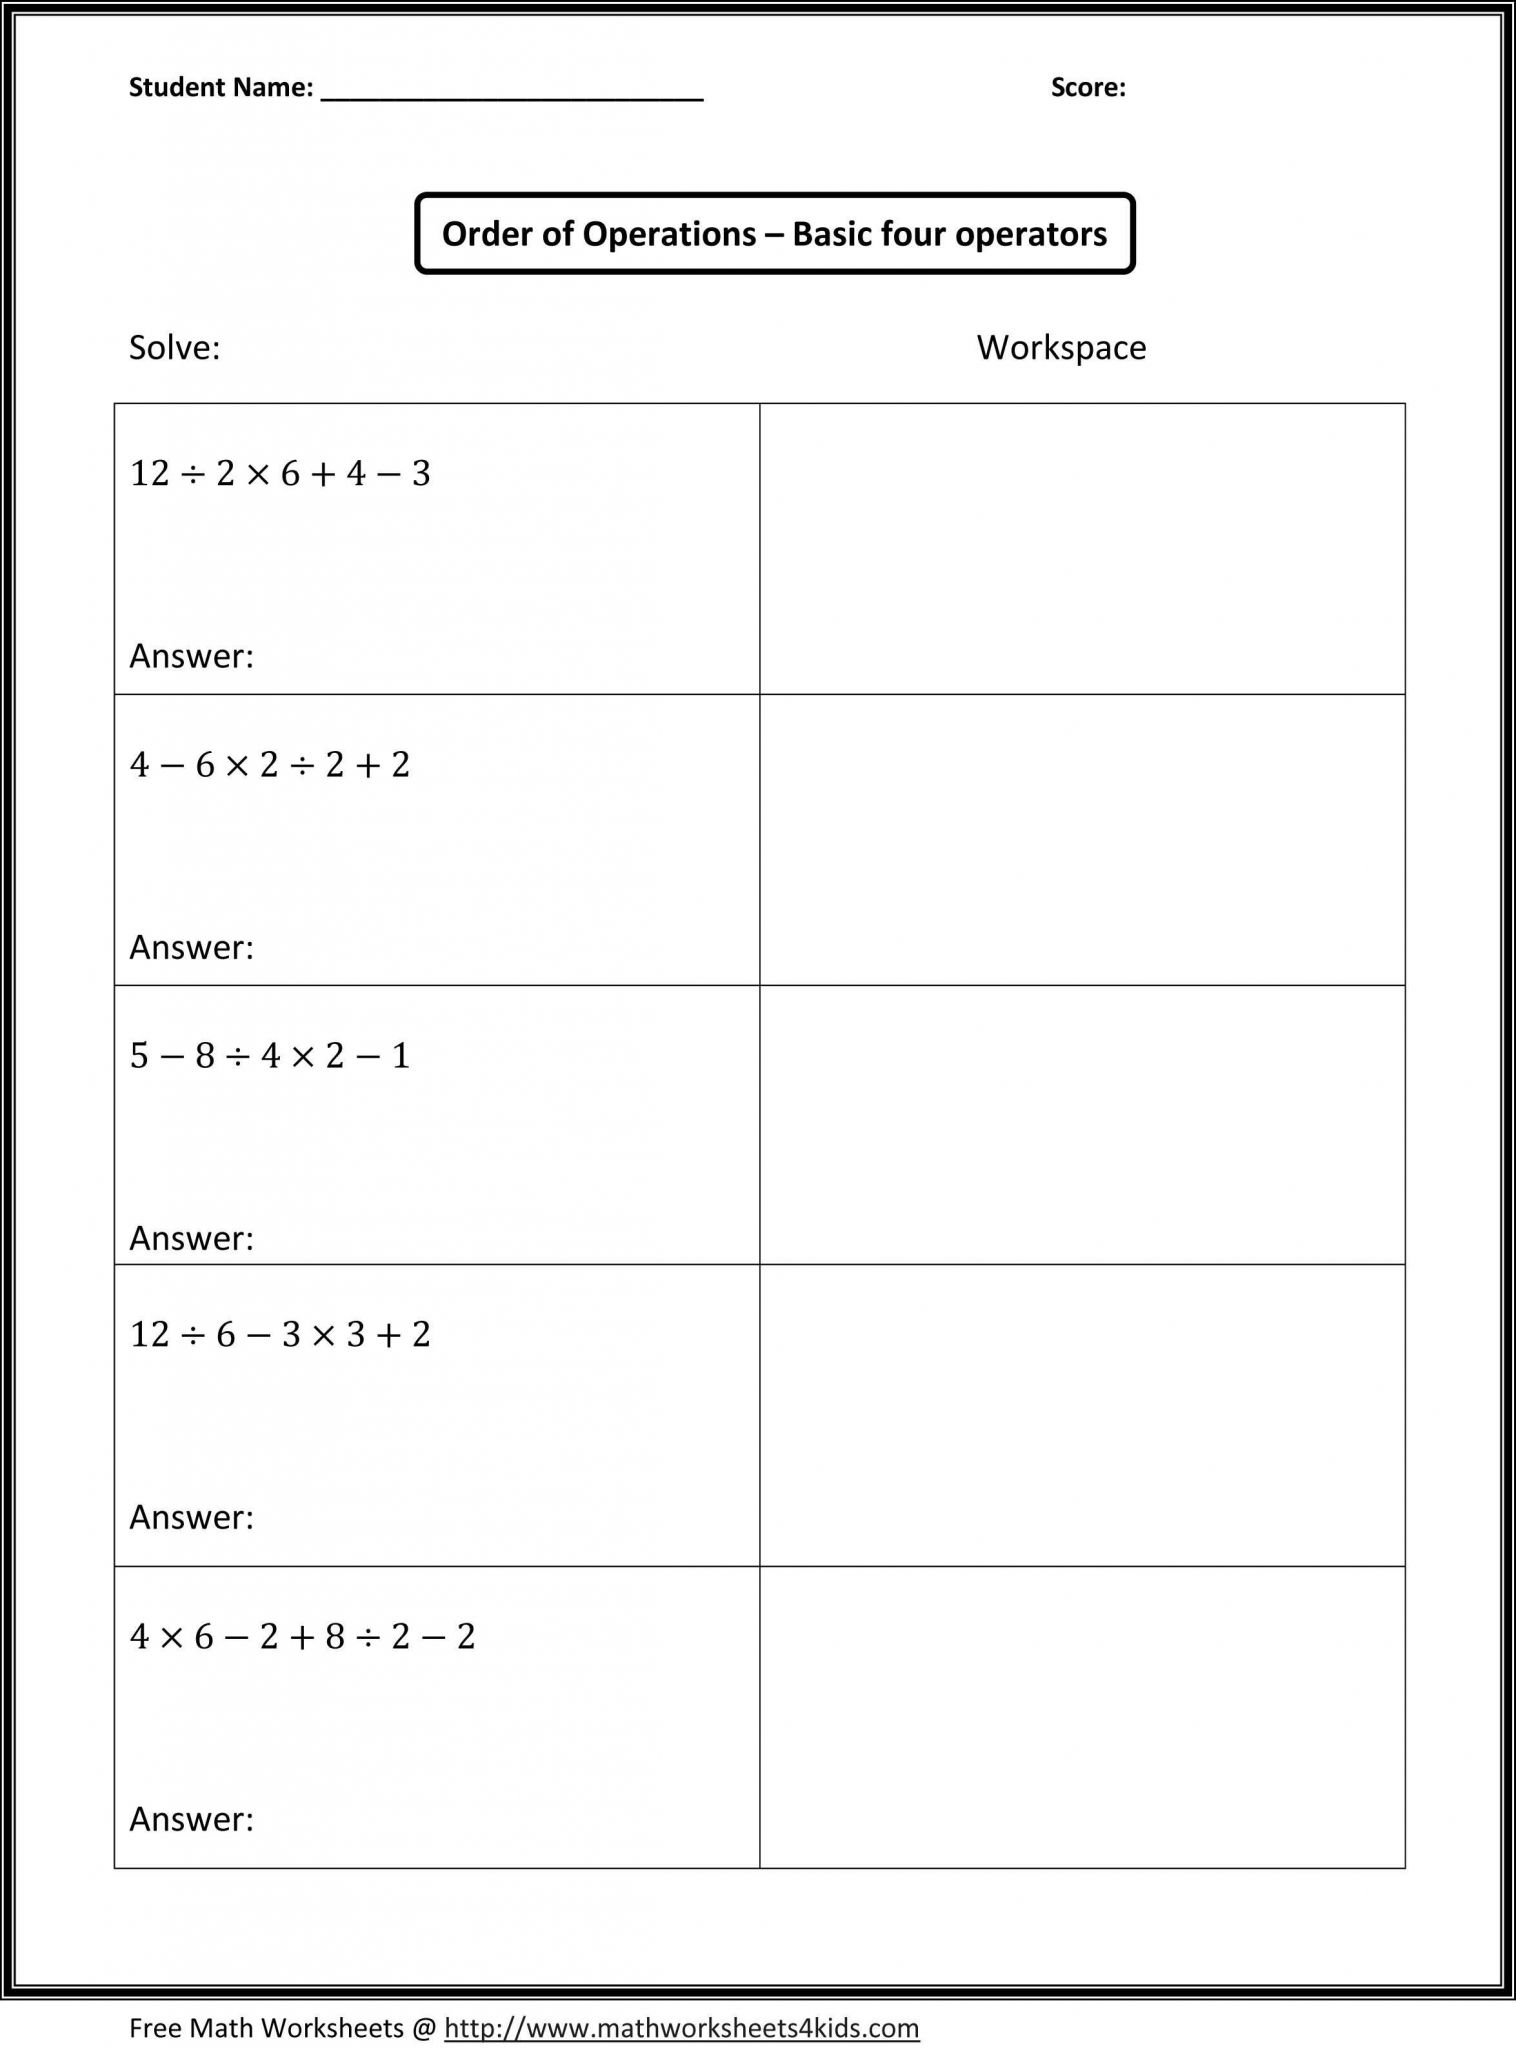 Factoring Using the Distributive Property Worksheet Answers together with 48 Elegant Factoring Distributive Property Worksheet Answers